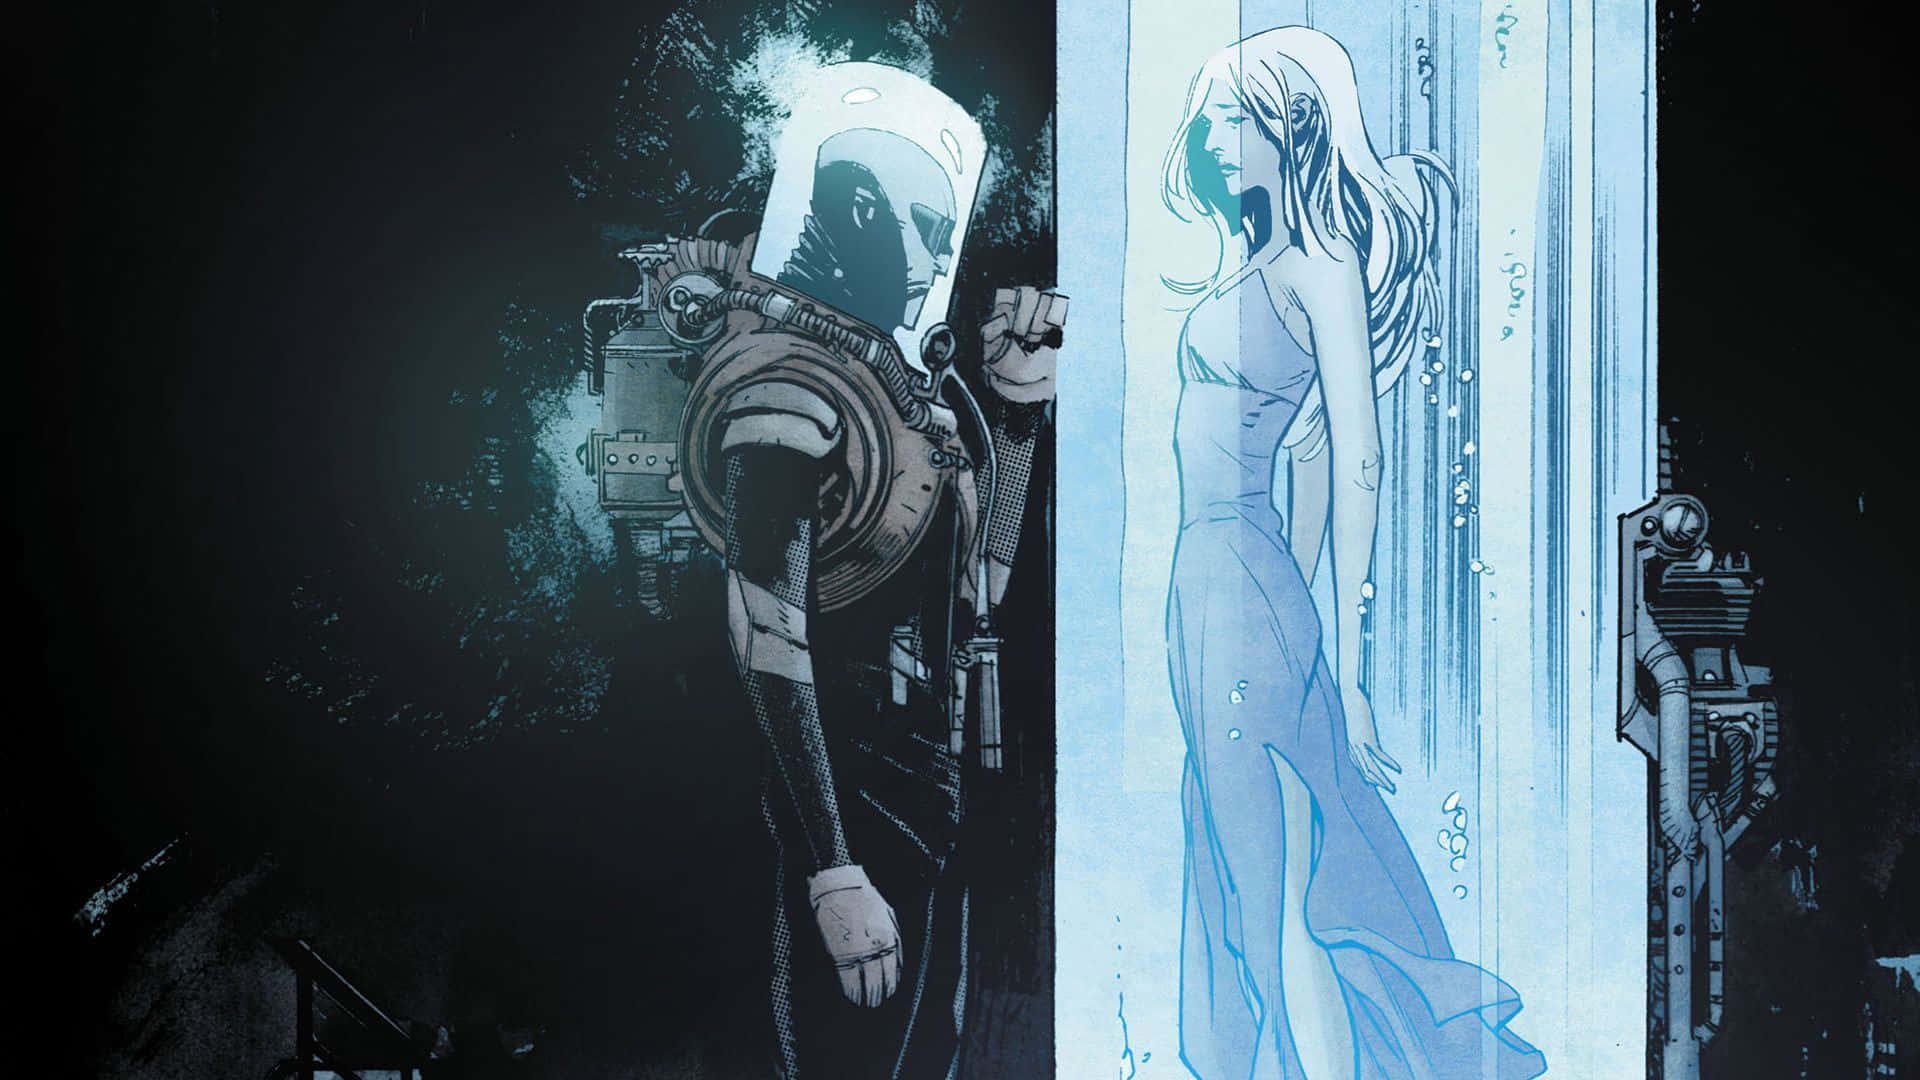 Mr. Freeze Dominating The Scene In A Chilling Pose